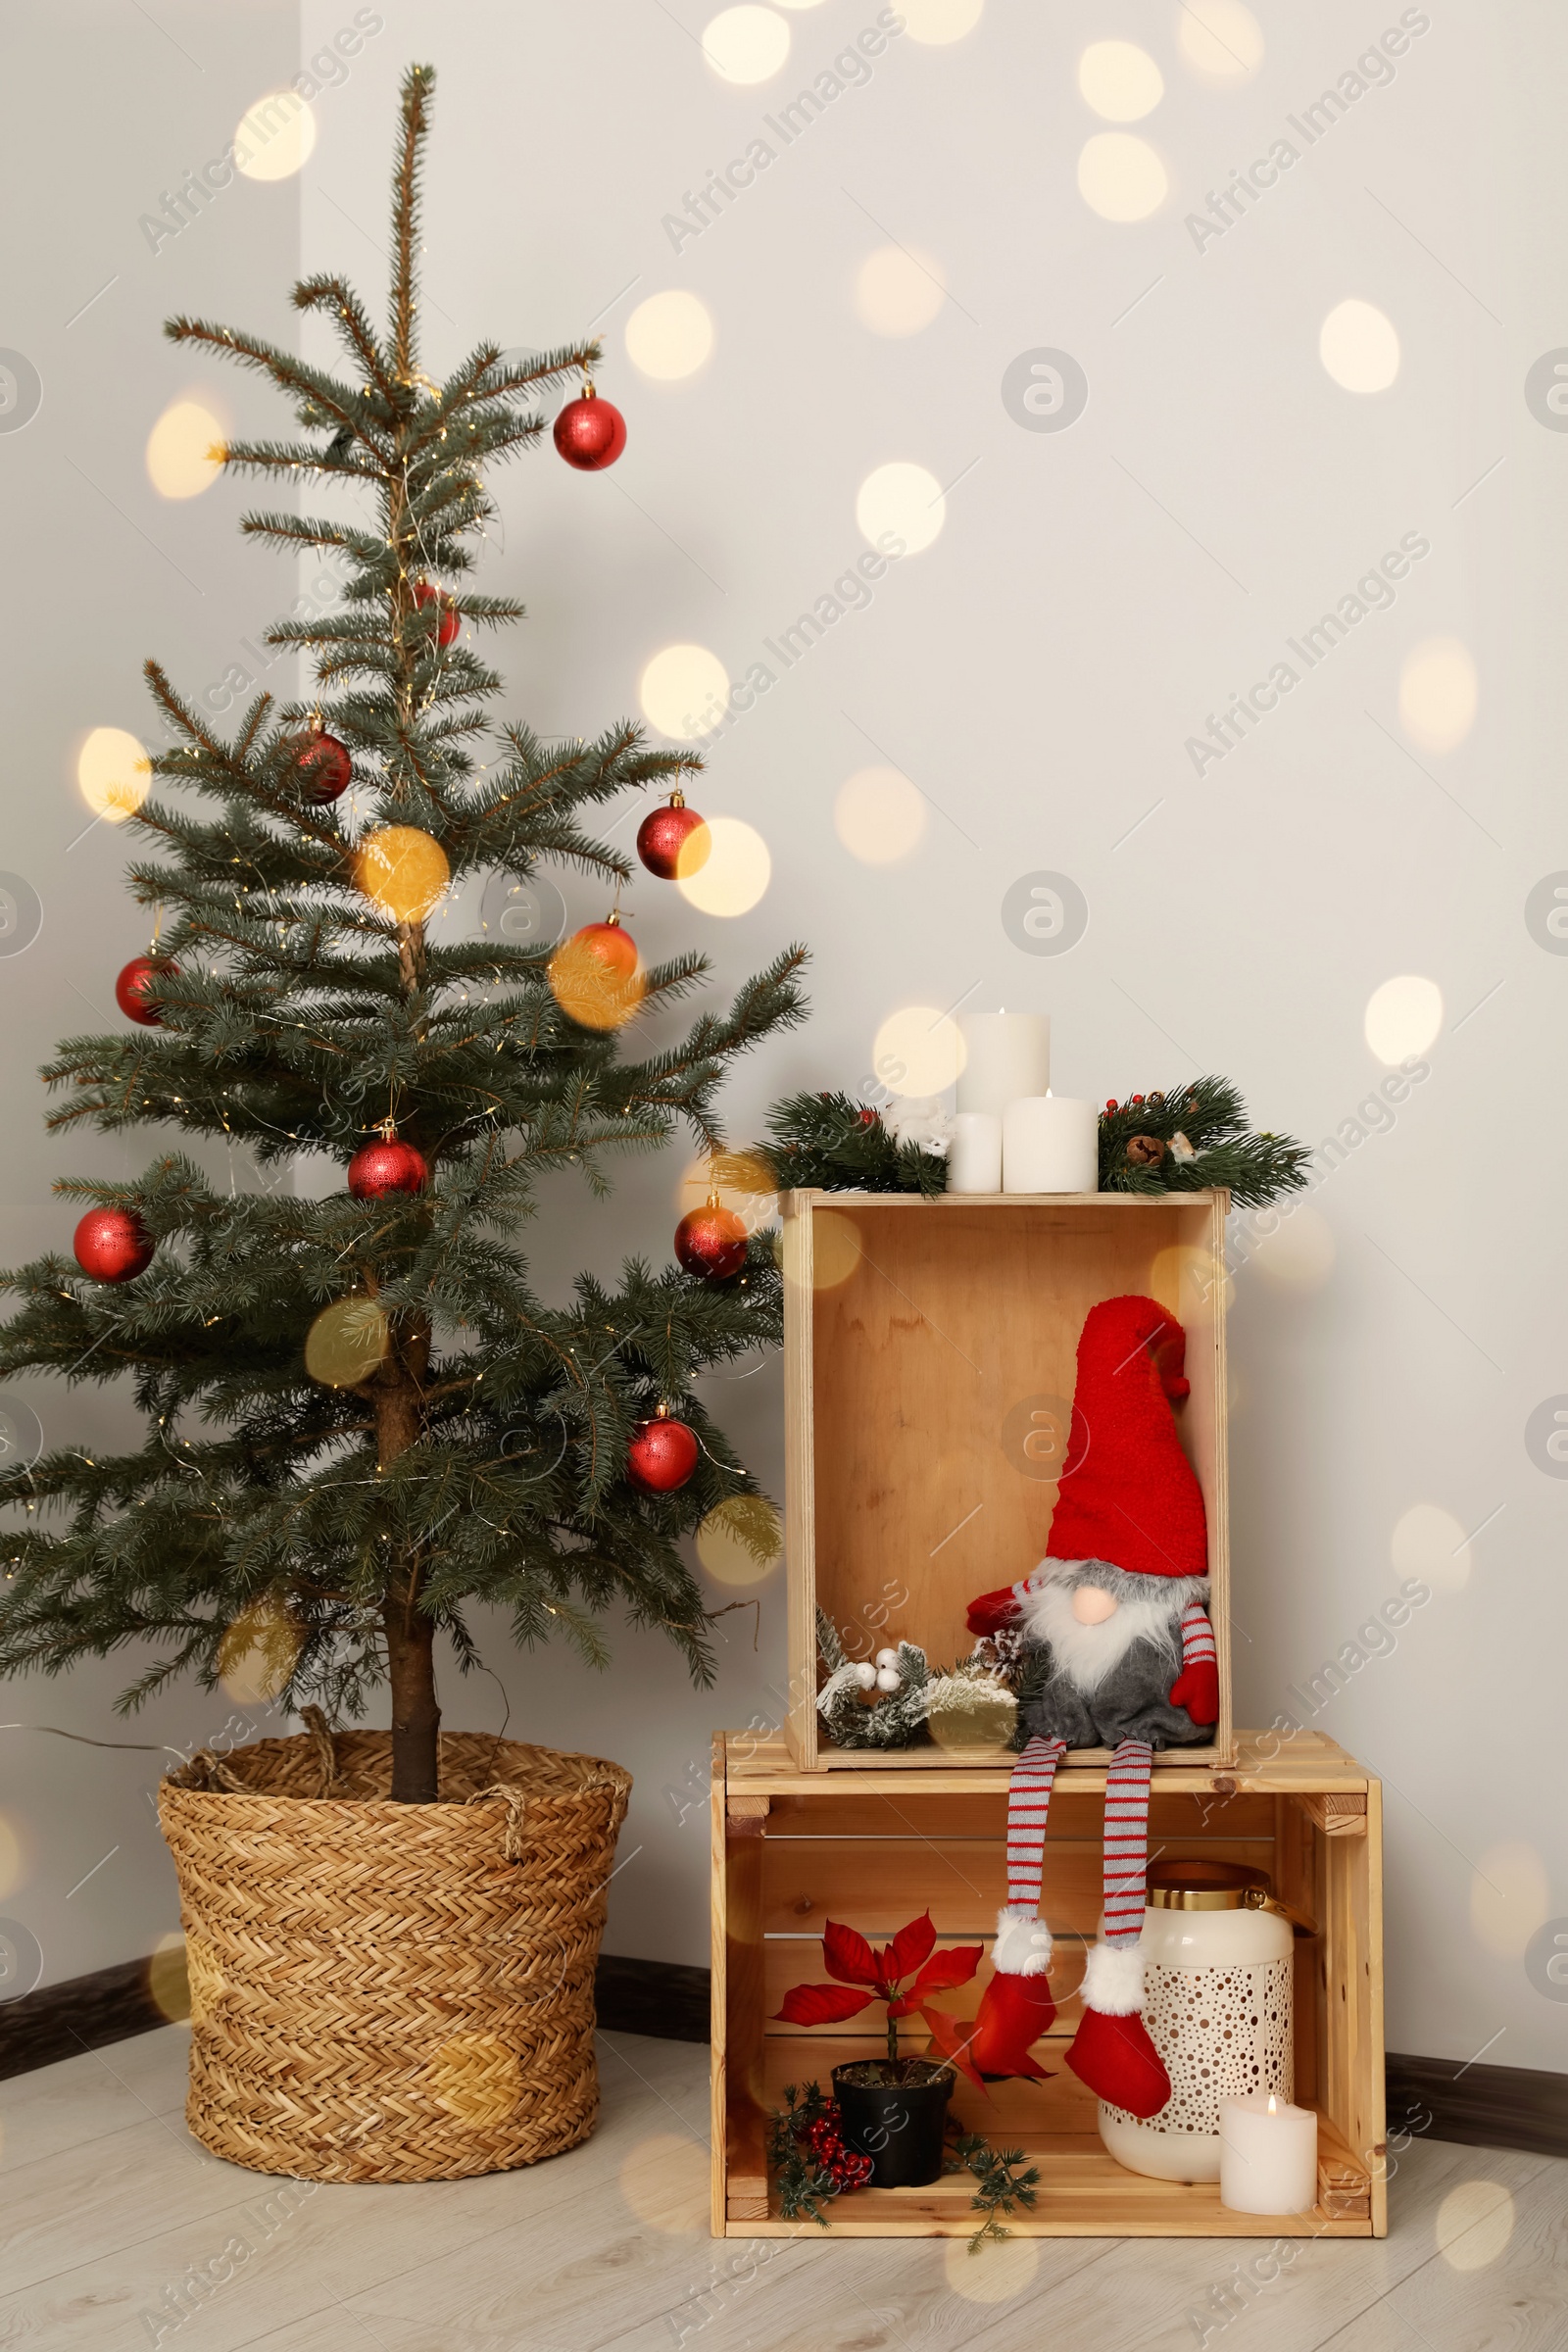 Photo of Christmas tree with red balls and festive decoration indoors